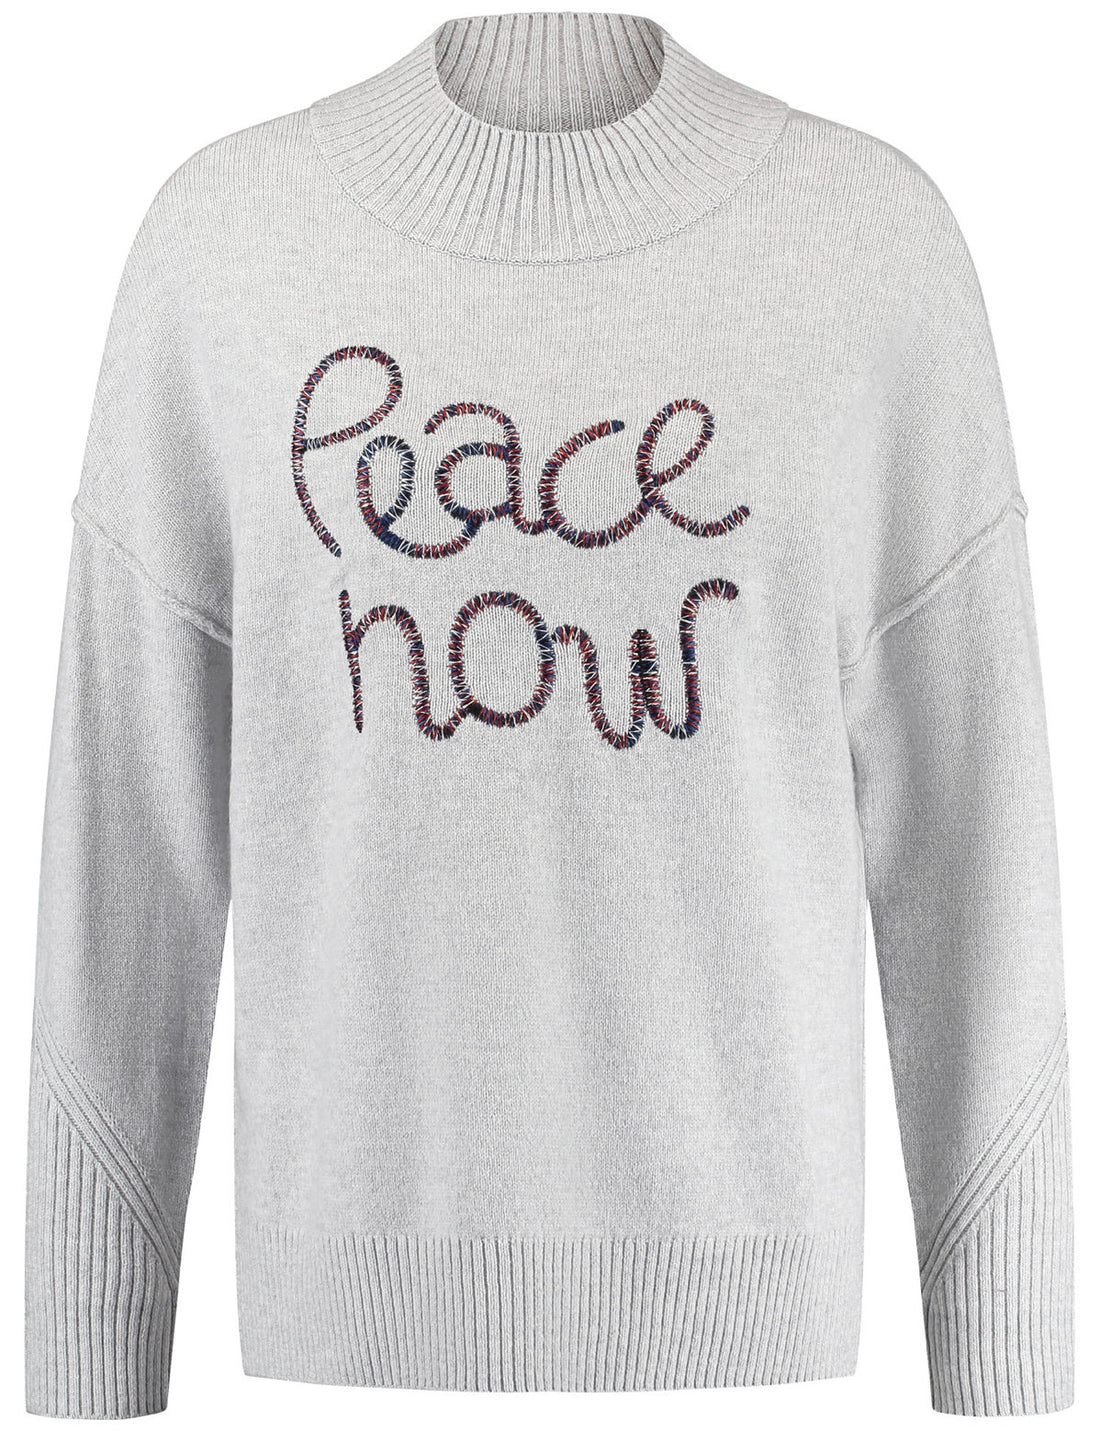 Jumper With Embroidered Lettering_472422-15403_2241_02